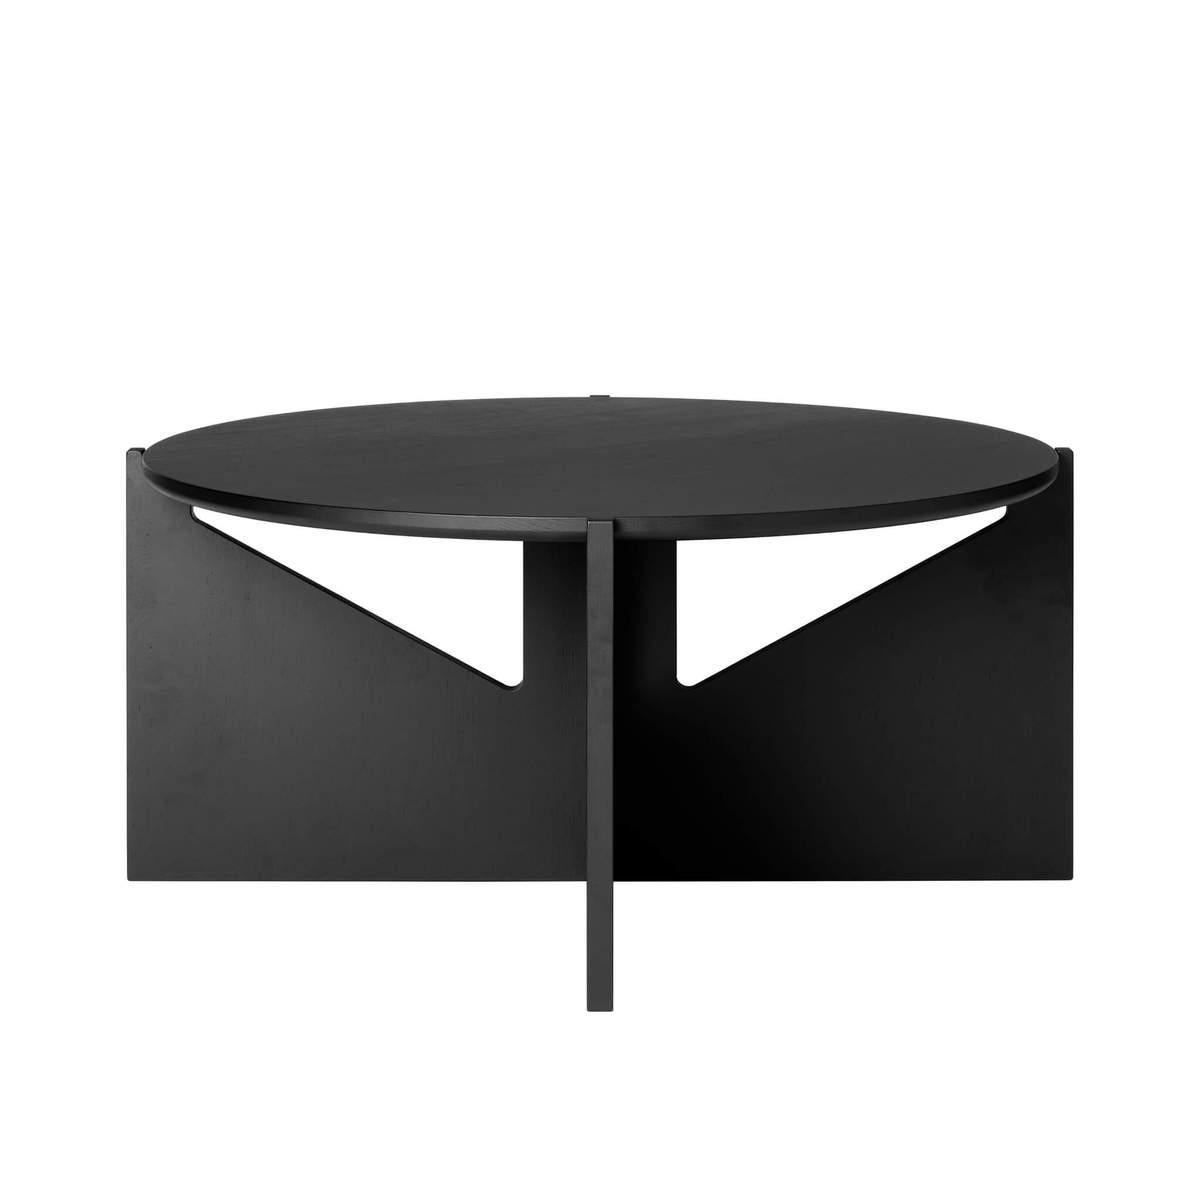 XL black table by Kristina Dam Studio
Materials: Solid oak with black lacquer. 
Also available in other colors and sizes. 
Dimensions: 78 x 78 x H 36cm.

XL black table is a big coffee table based on the exact same design as the Stool and